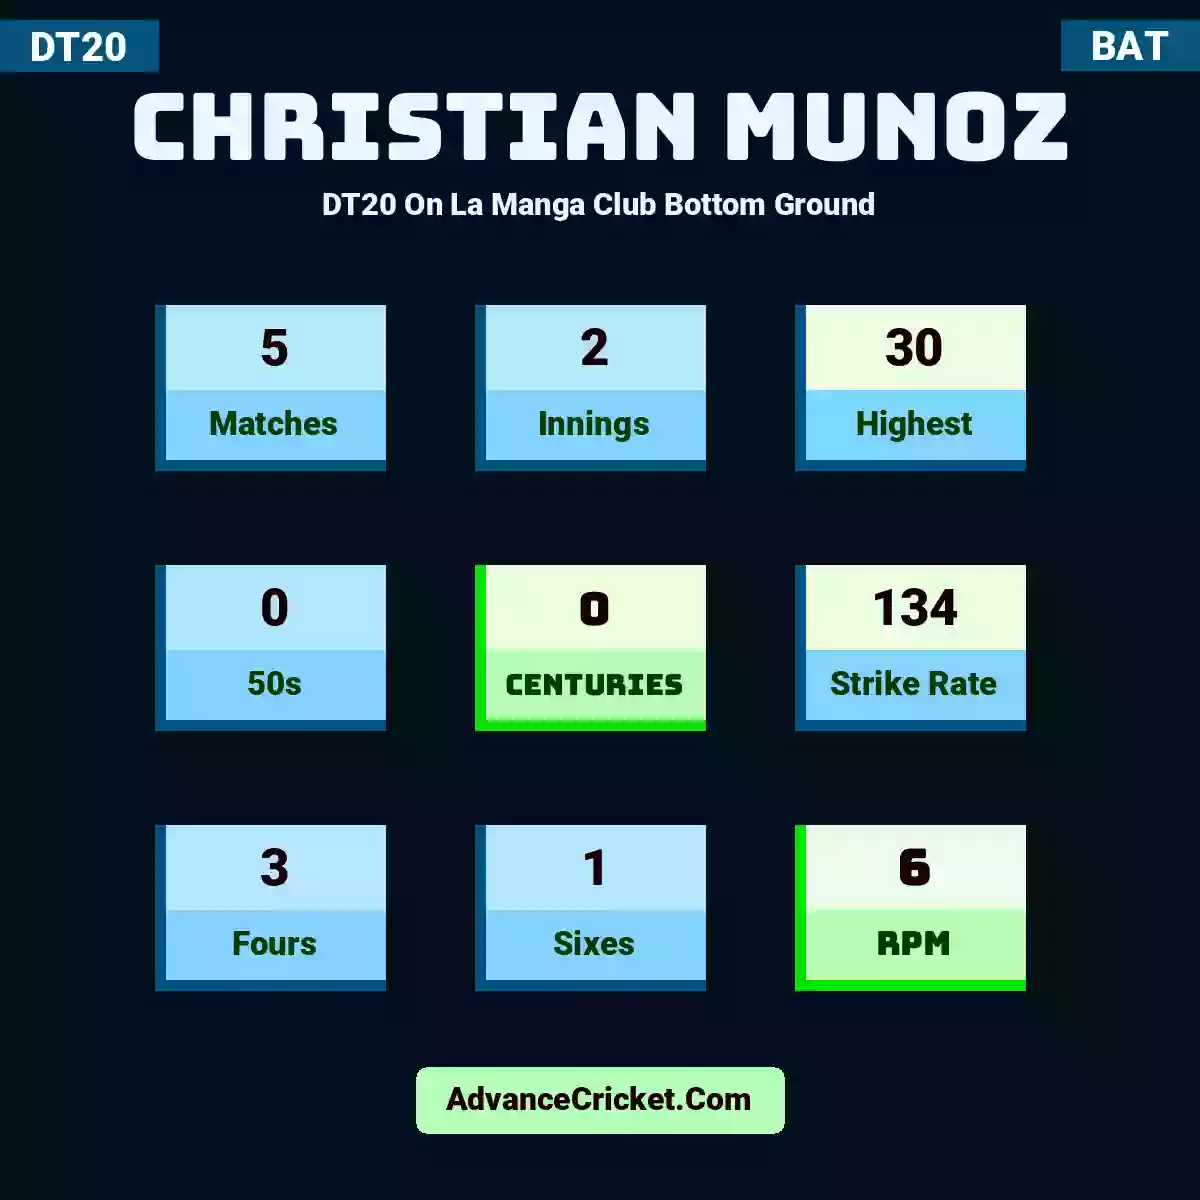 Christian Munoz DT20  On La Manga Club Bottom Ground, Christian Munoz played 5 matches, scored 30 runs as highest, 0 half-centuries, and 0 centuries, with a strike rate of 134. C.Munoz hit 3 fours and 1 sixes, with an RPM of 6.